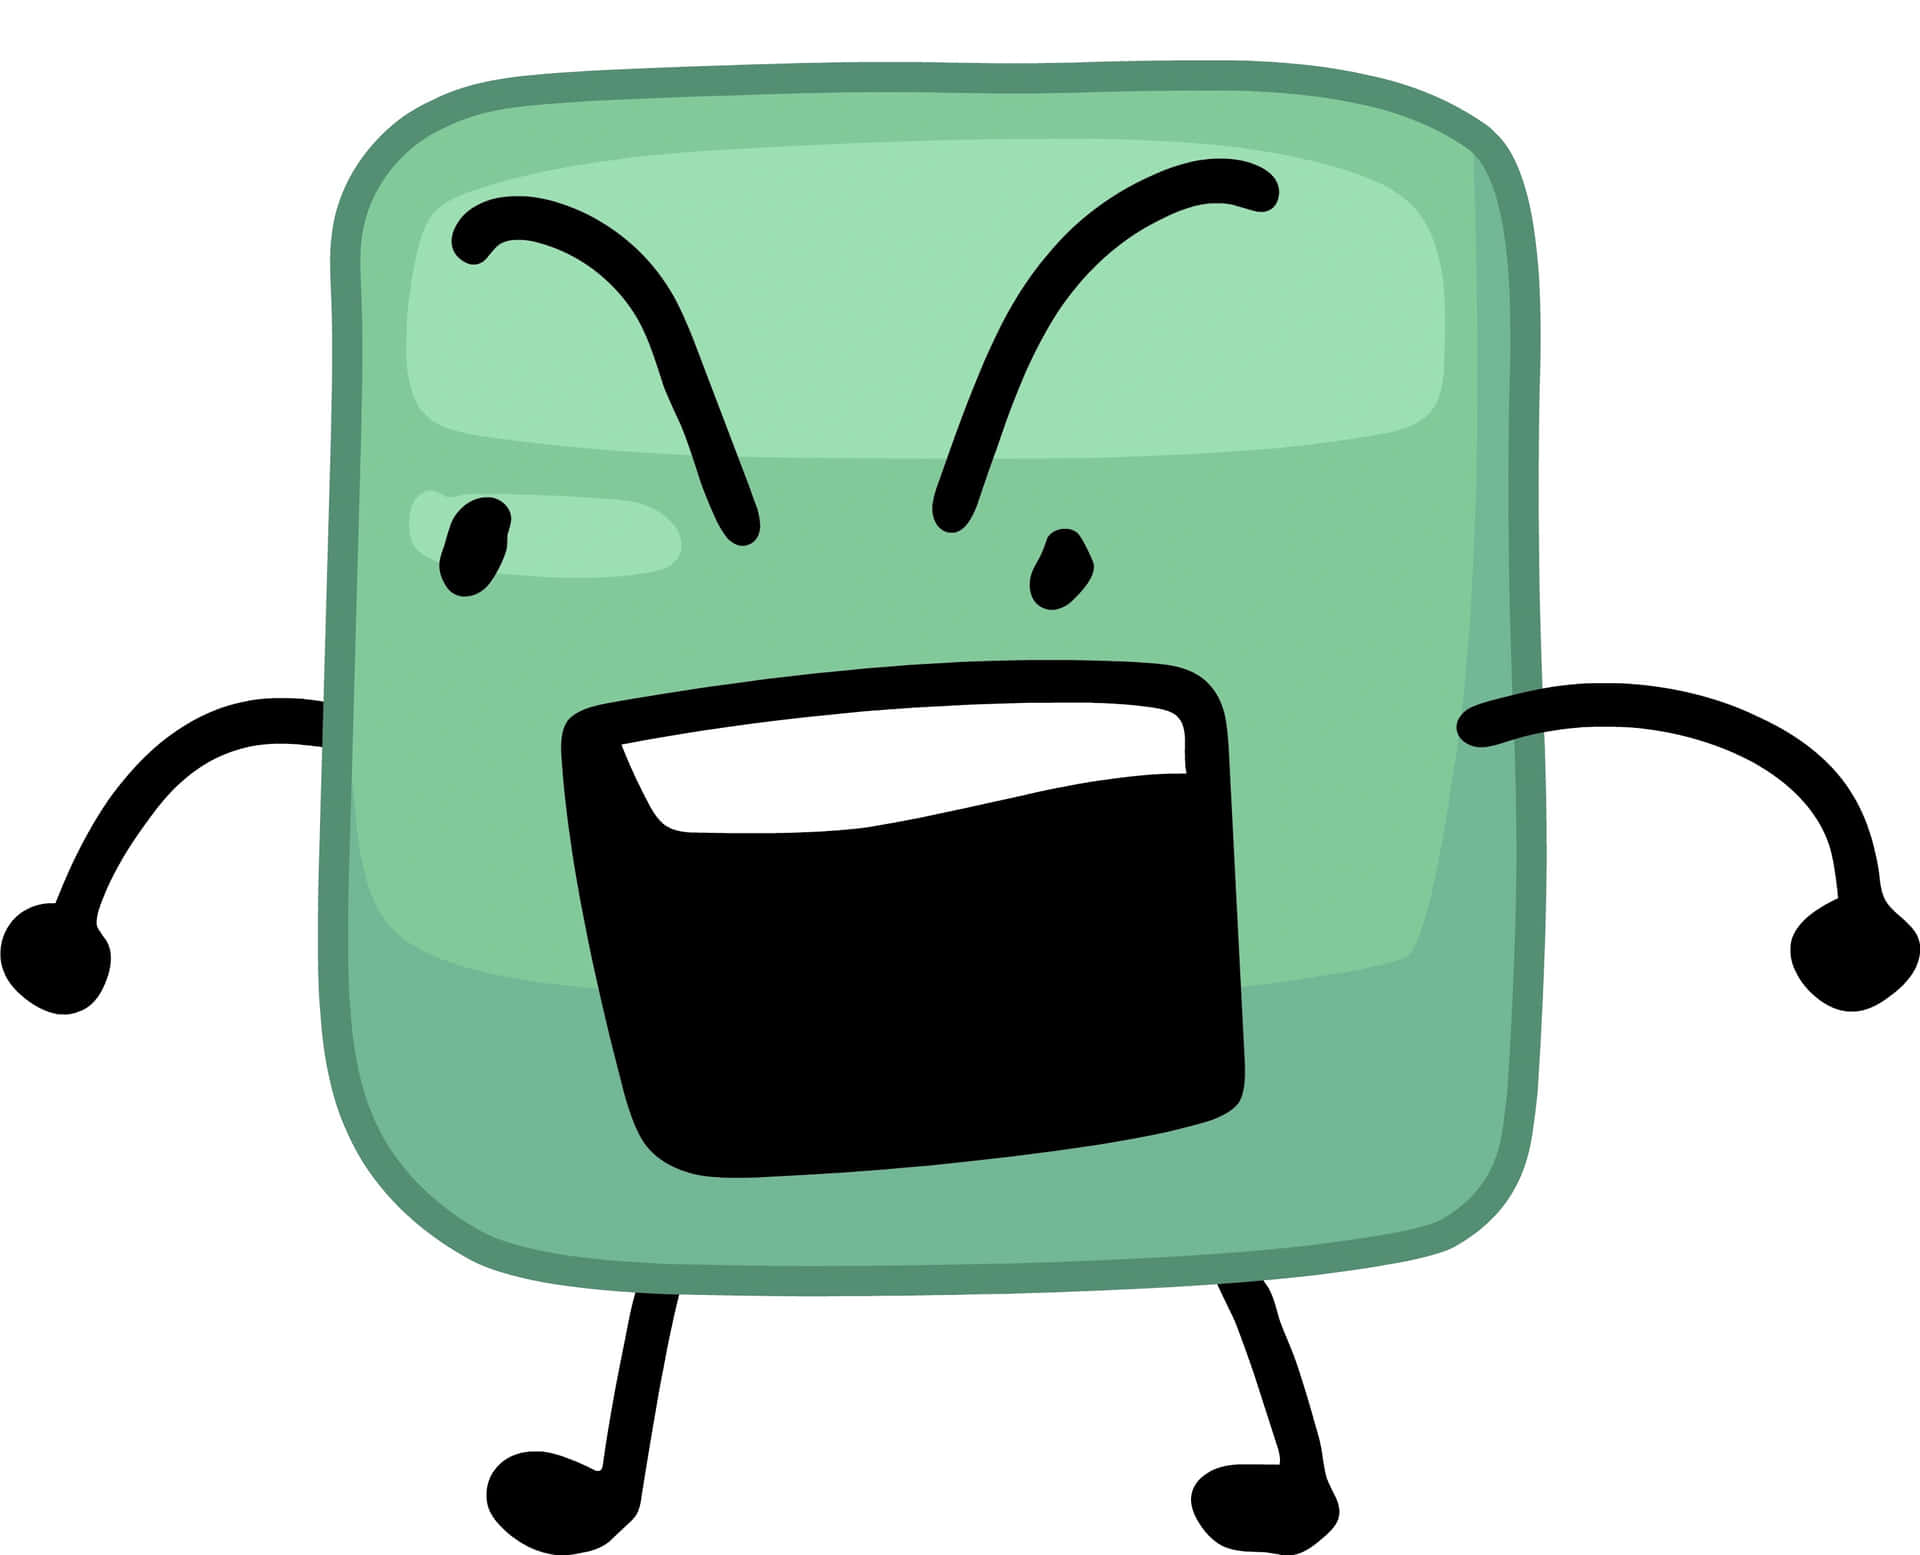 A Green Square With An Angry Face